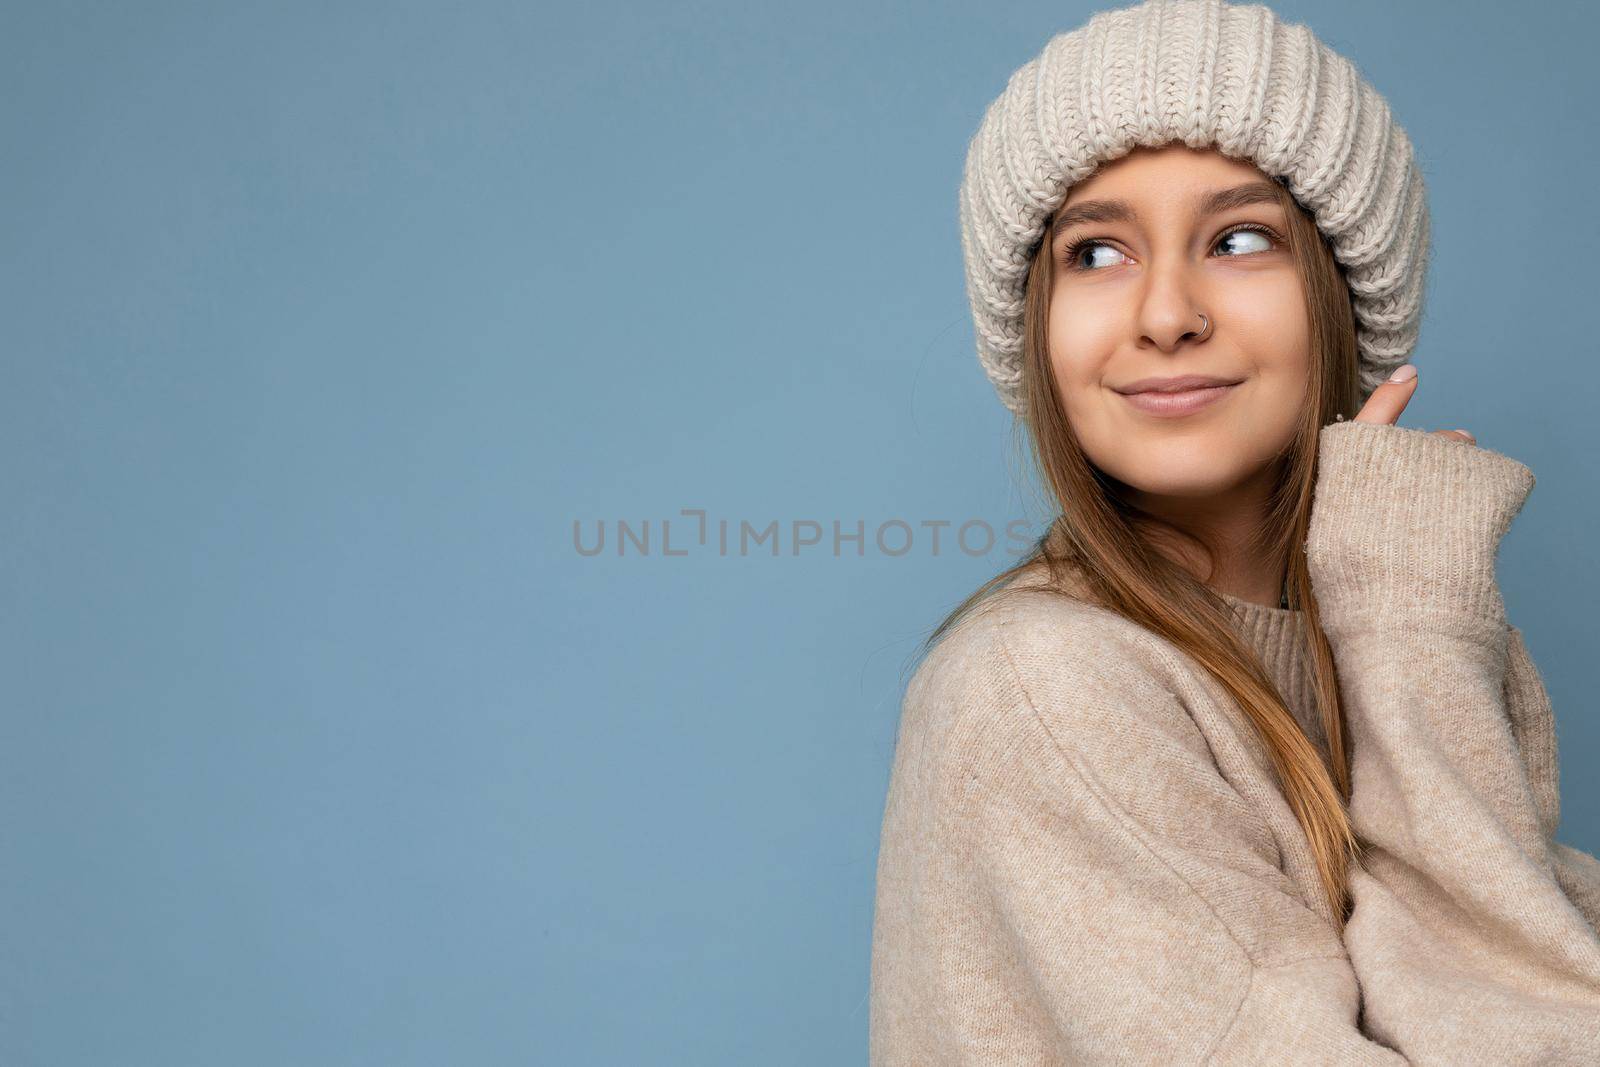 Shot of beautiful sexy smiling adult blonde woman standing isolated on blue background wall wearing beige warm sweater and winter beige hat looking to the side and enjoying. Empty space, copy space